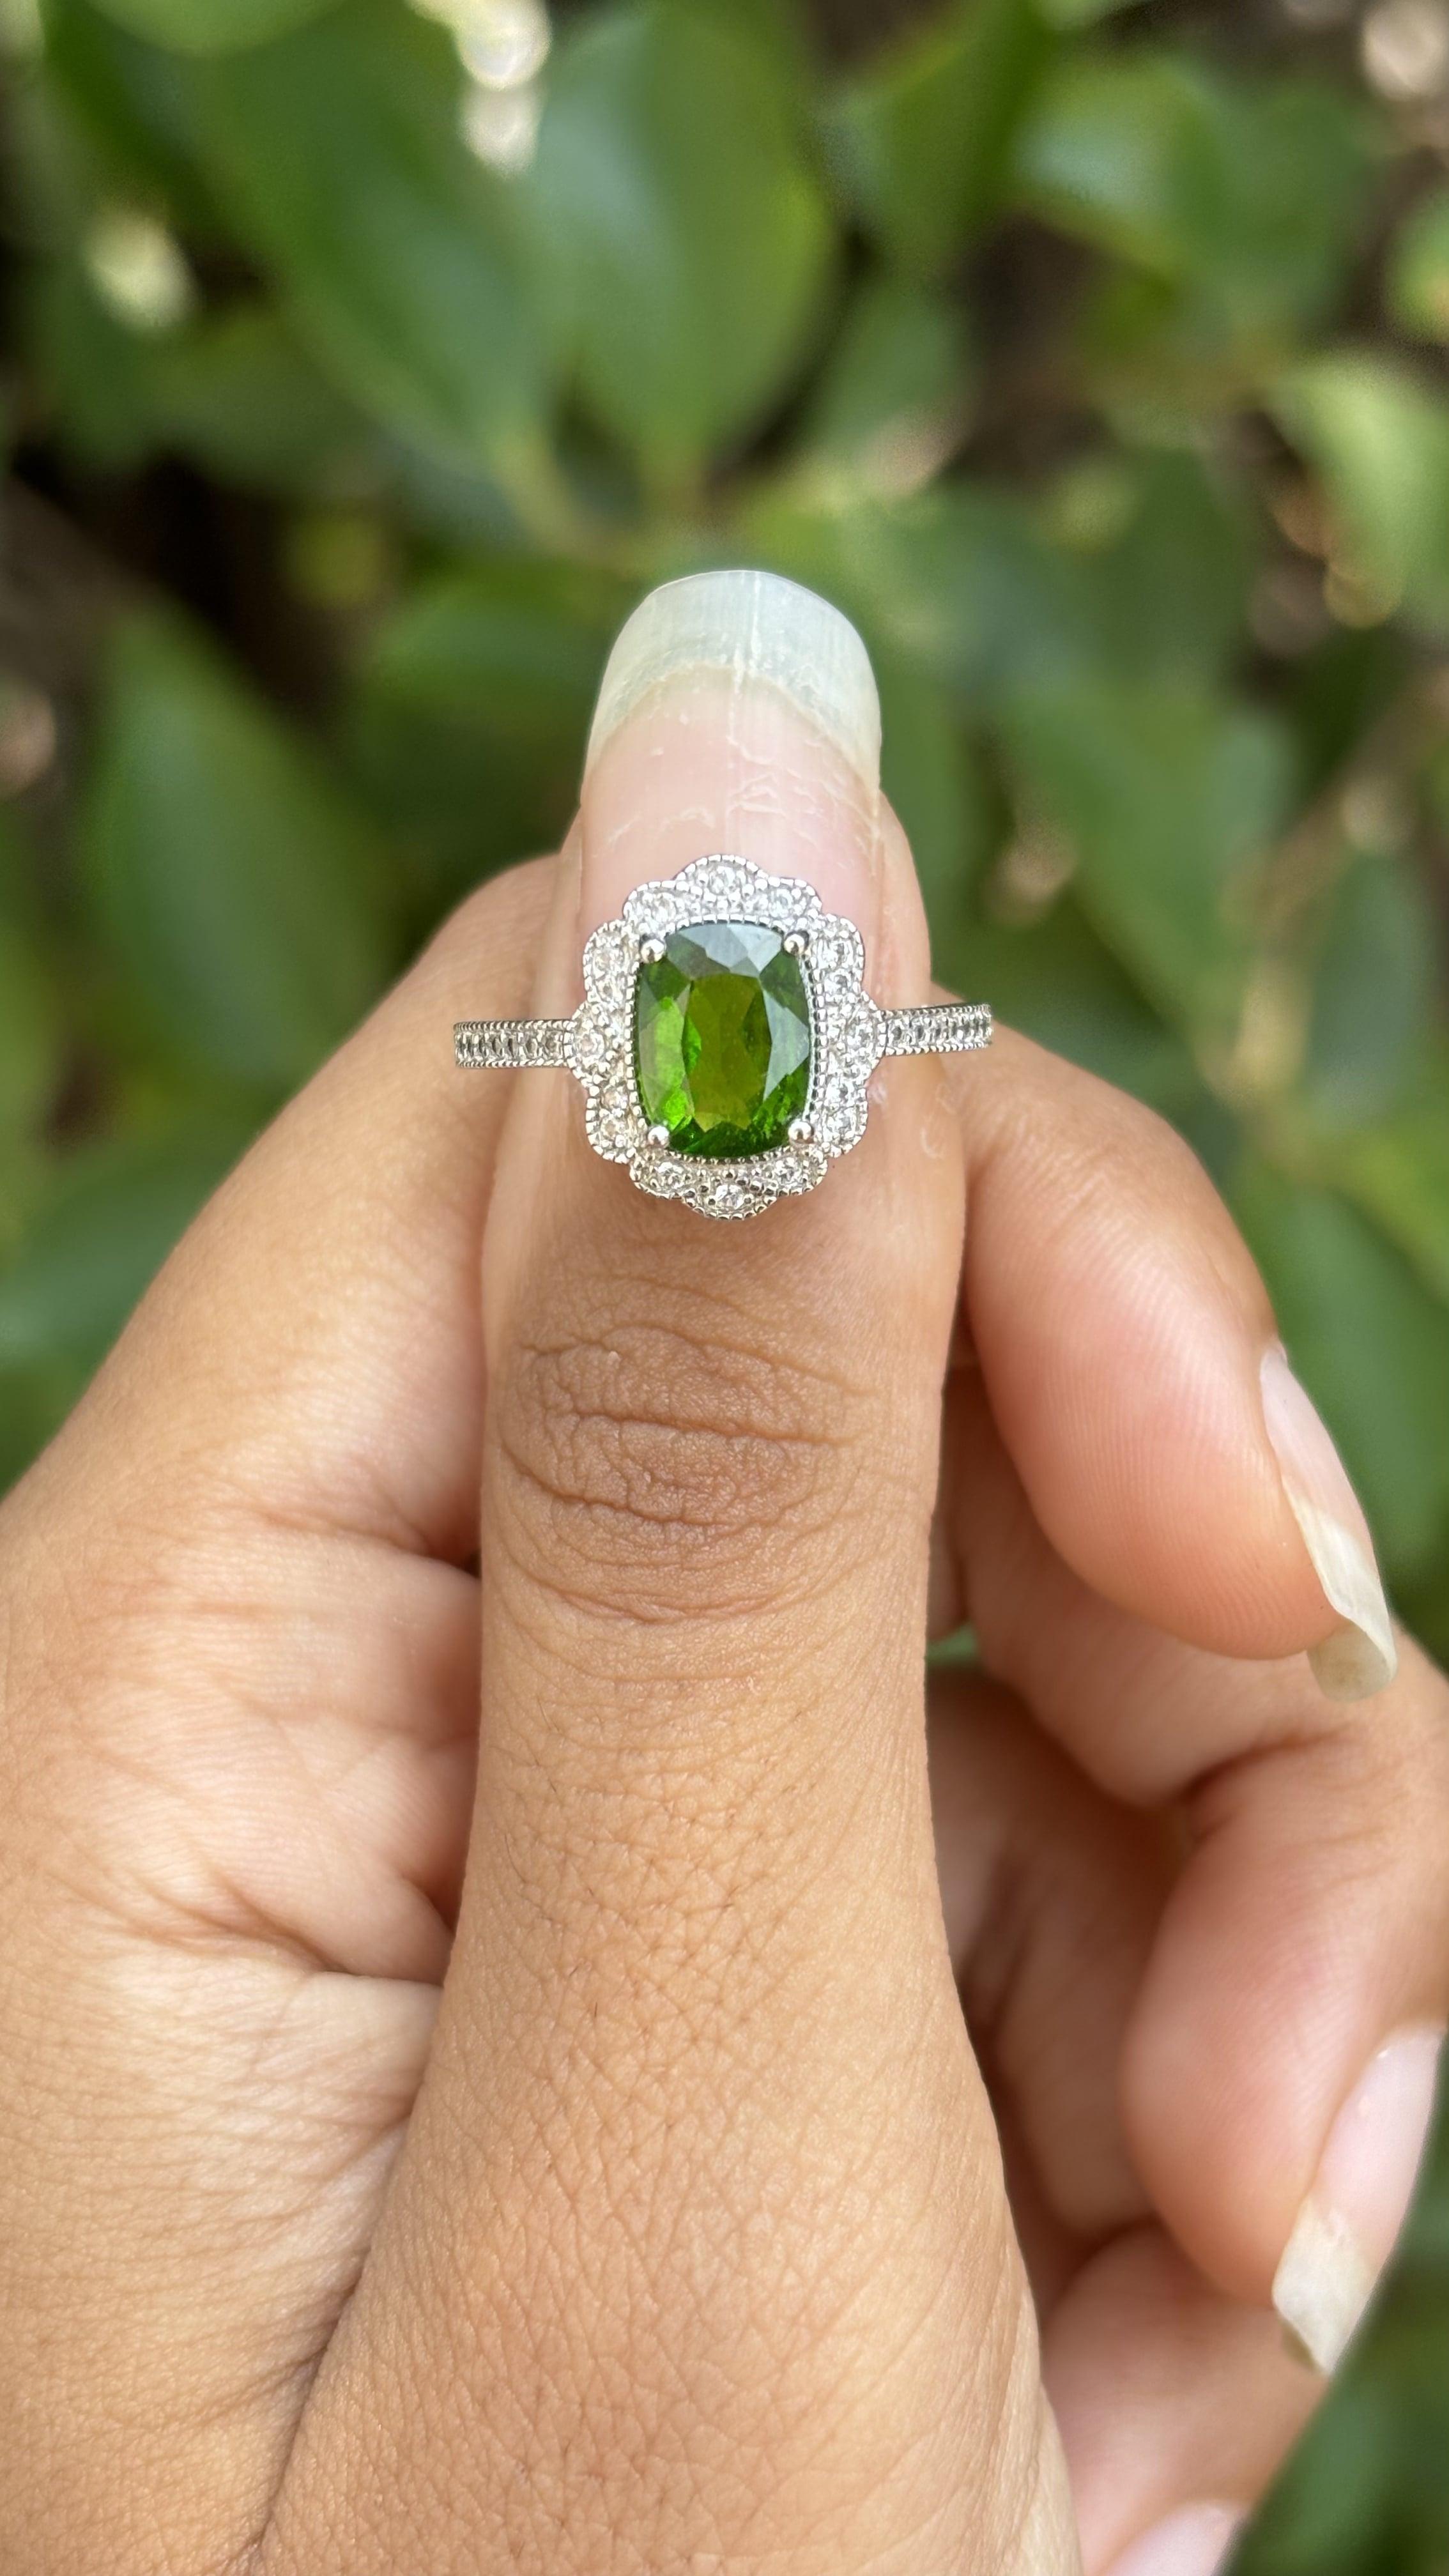 Antique circa 1900s Diopside & CZ Ring in Silver 6